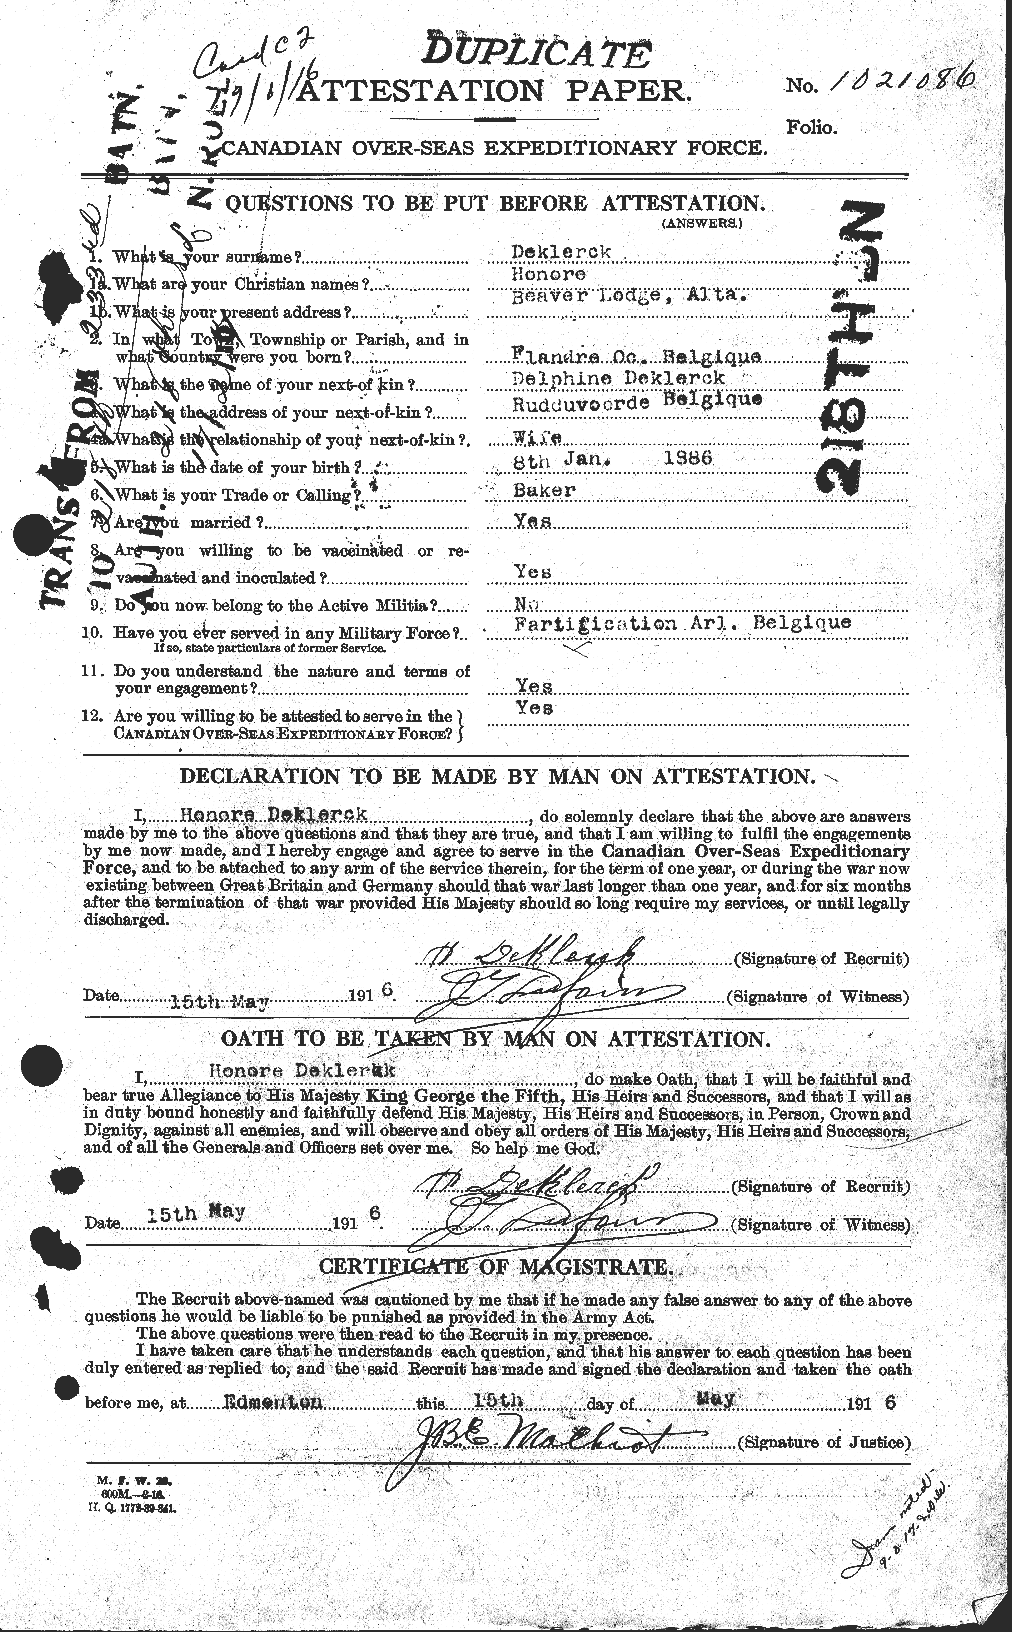 Personnel Records of the First World War - CEF 288373a